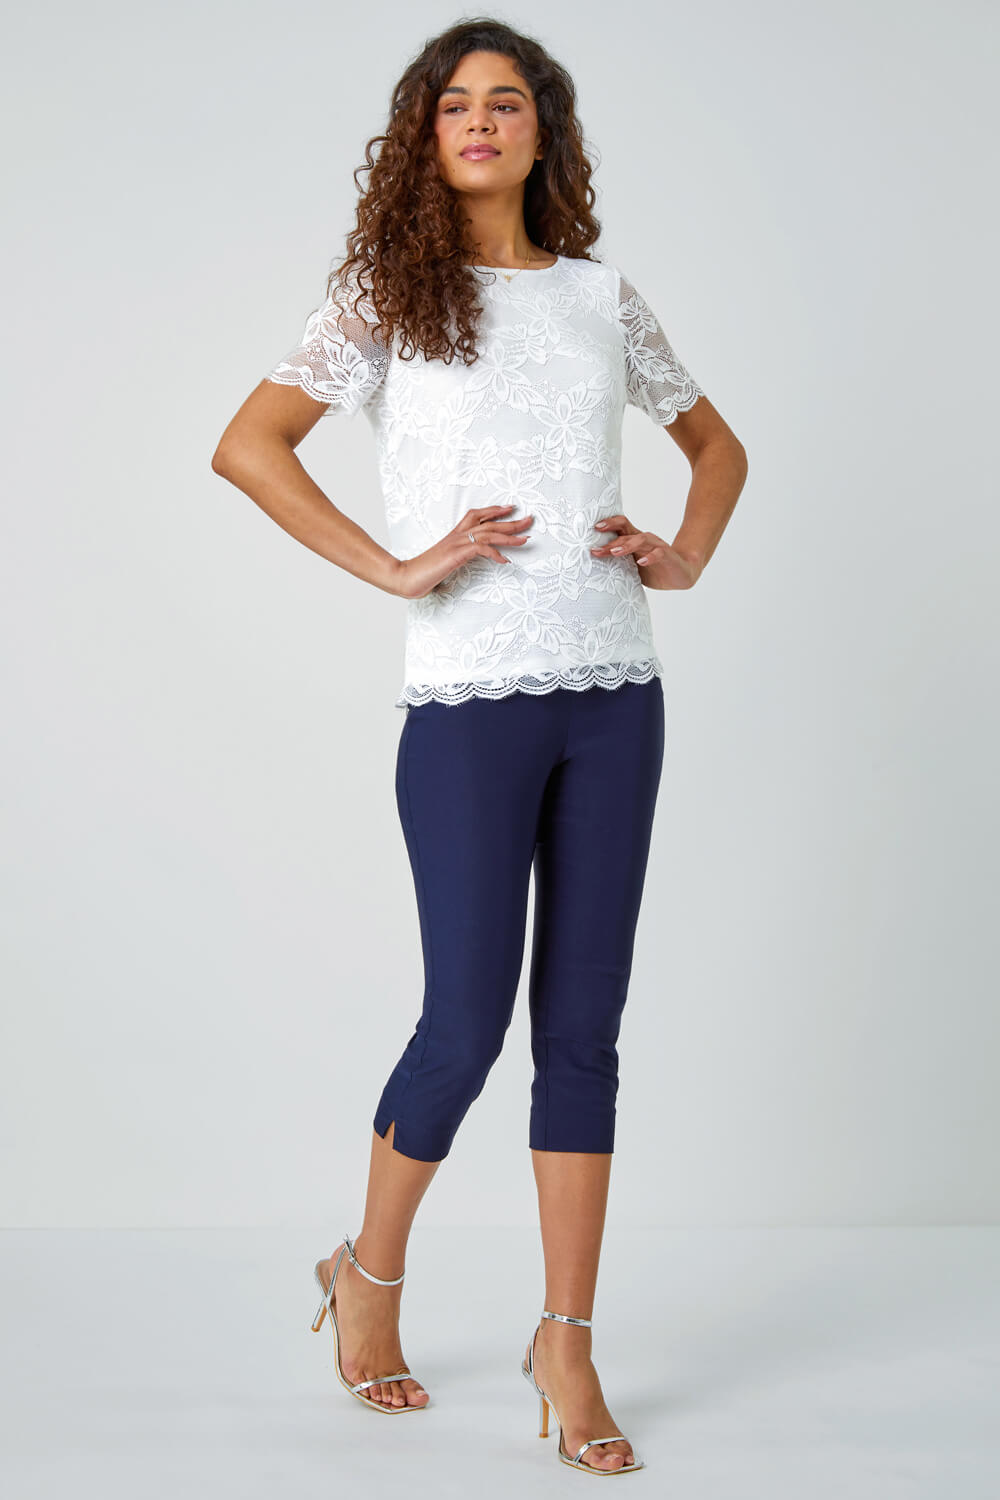 Ivory  Floral Stretch Lace Top, Image 2 of 5